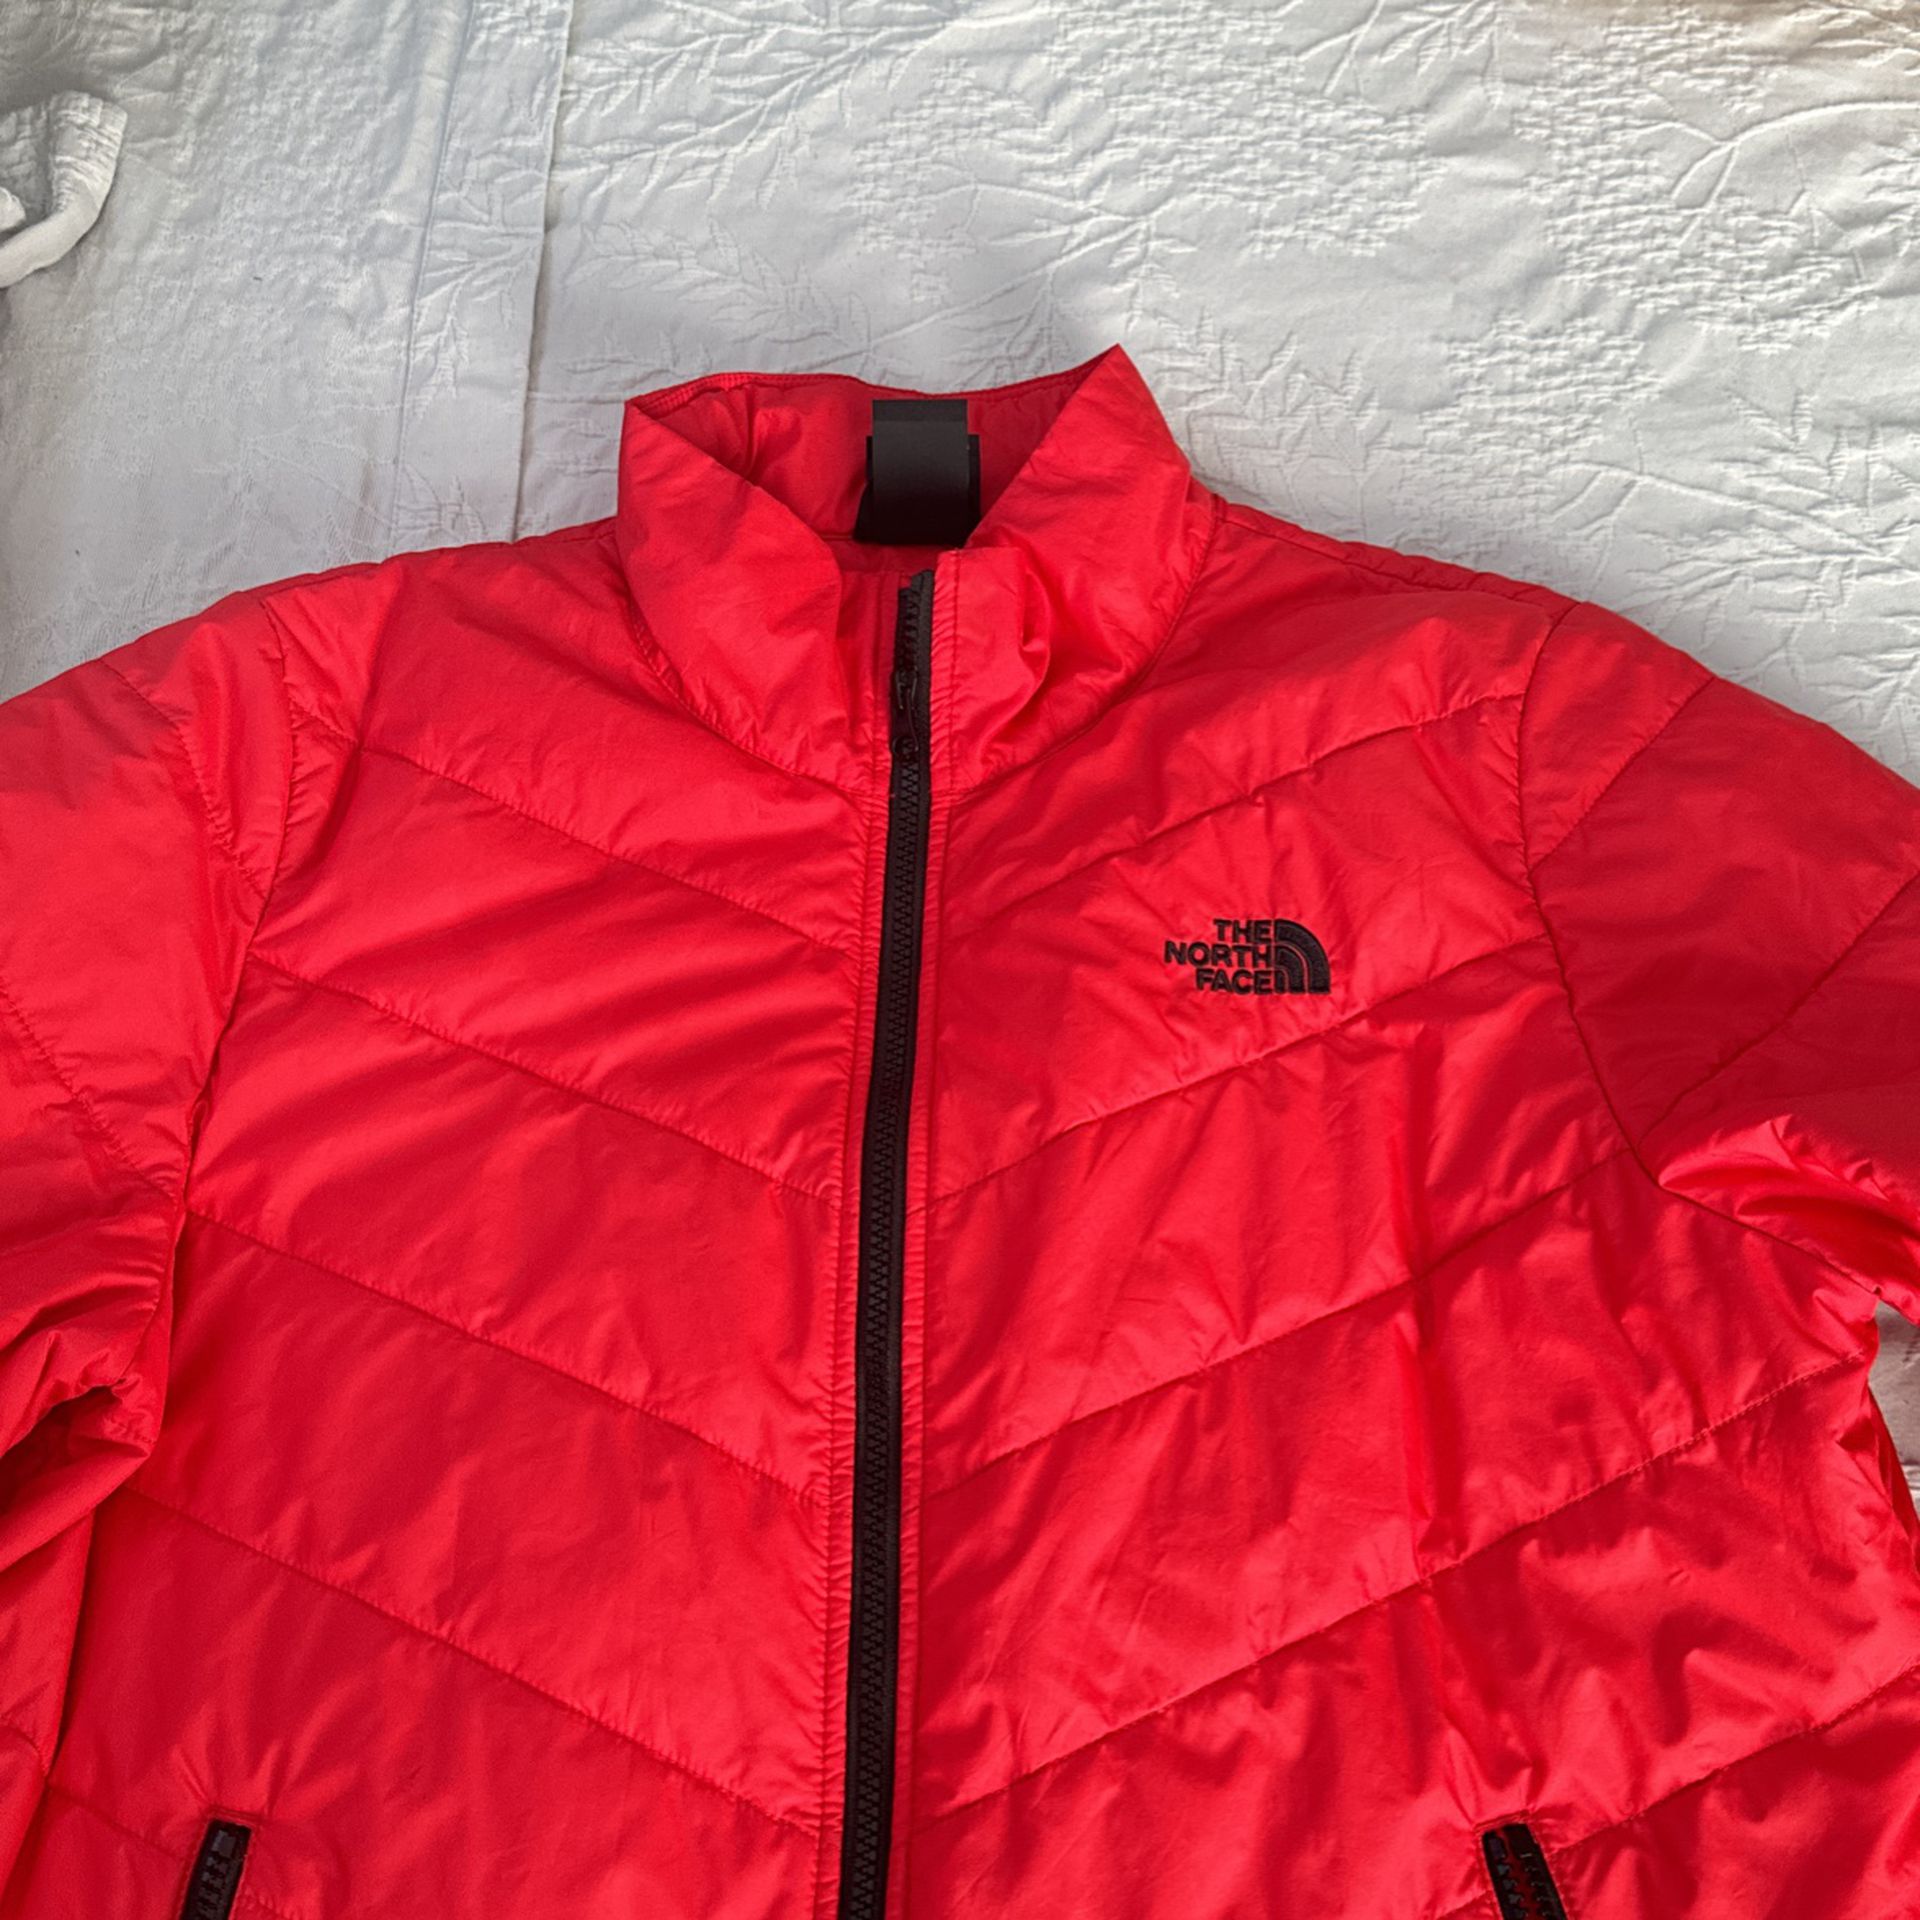 North face red jacket 